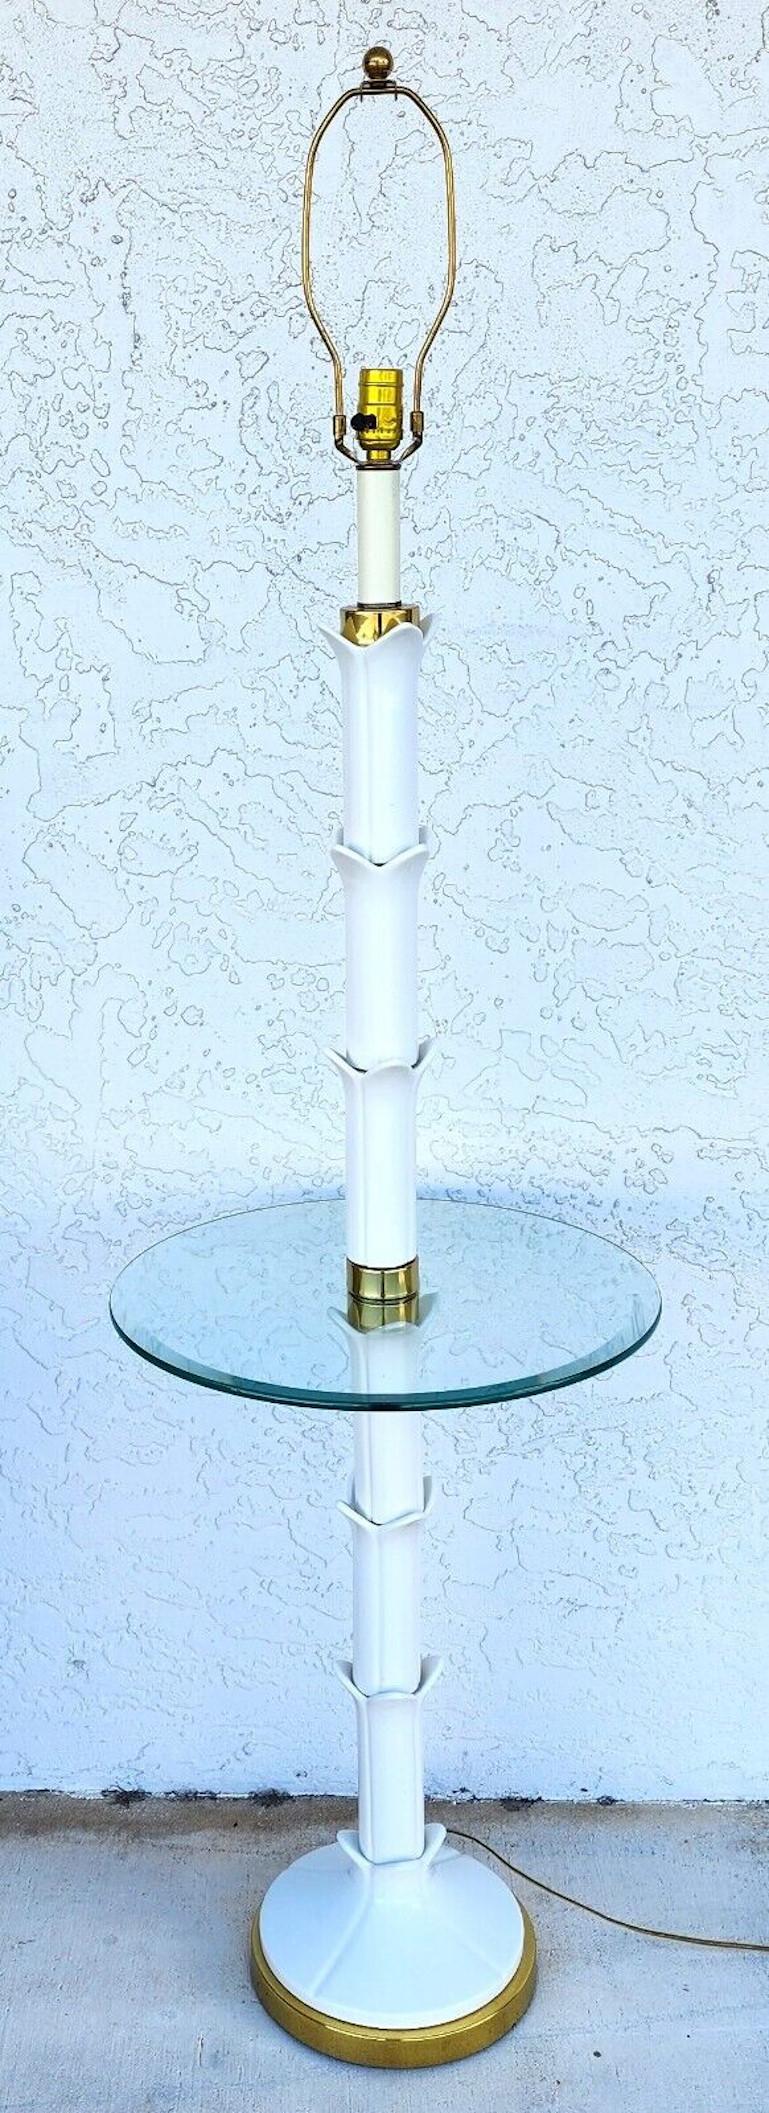 For FULL item description click on CONTINUE READING at the bottom of this page.

Offering One Of Our Recent Palm Beach Estate Fine Lighting Acquisitions Of A 
Serge Roche Glazed Ceramic Table Floor Lamp in White
A spectacular and rare floor lamp